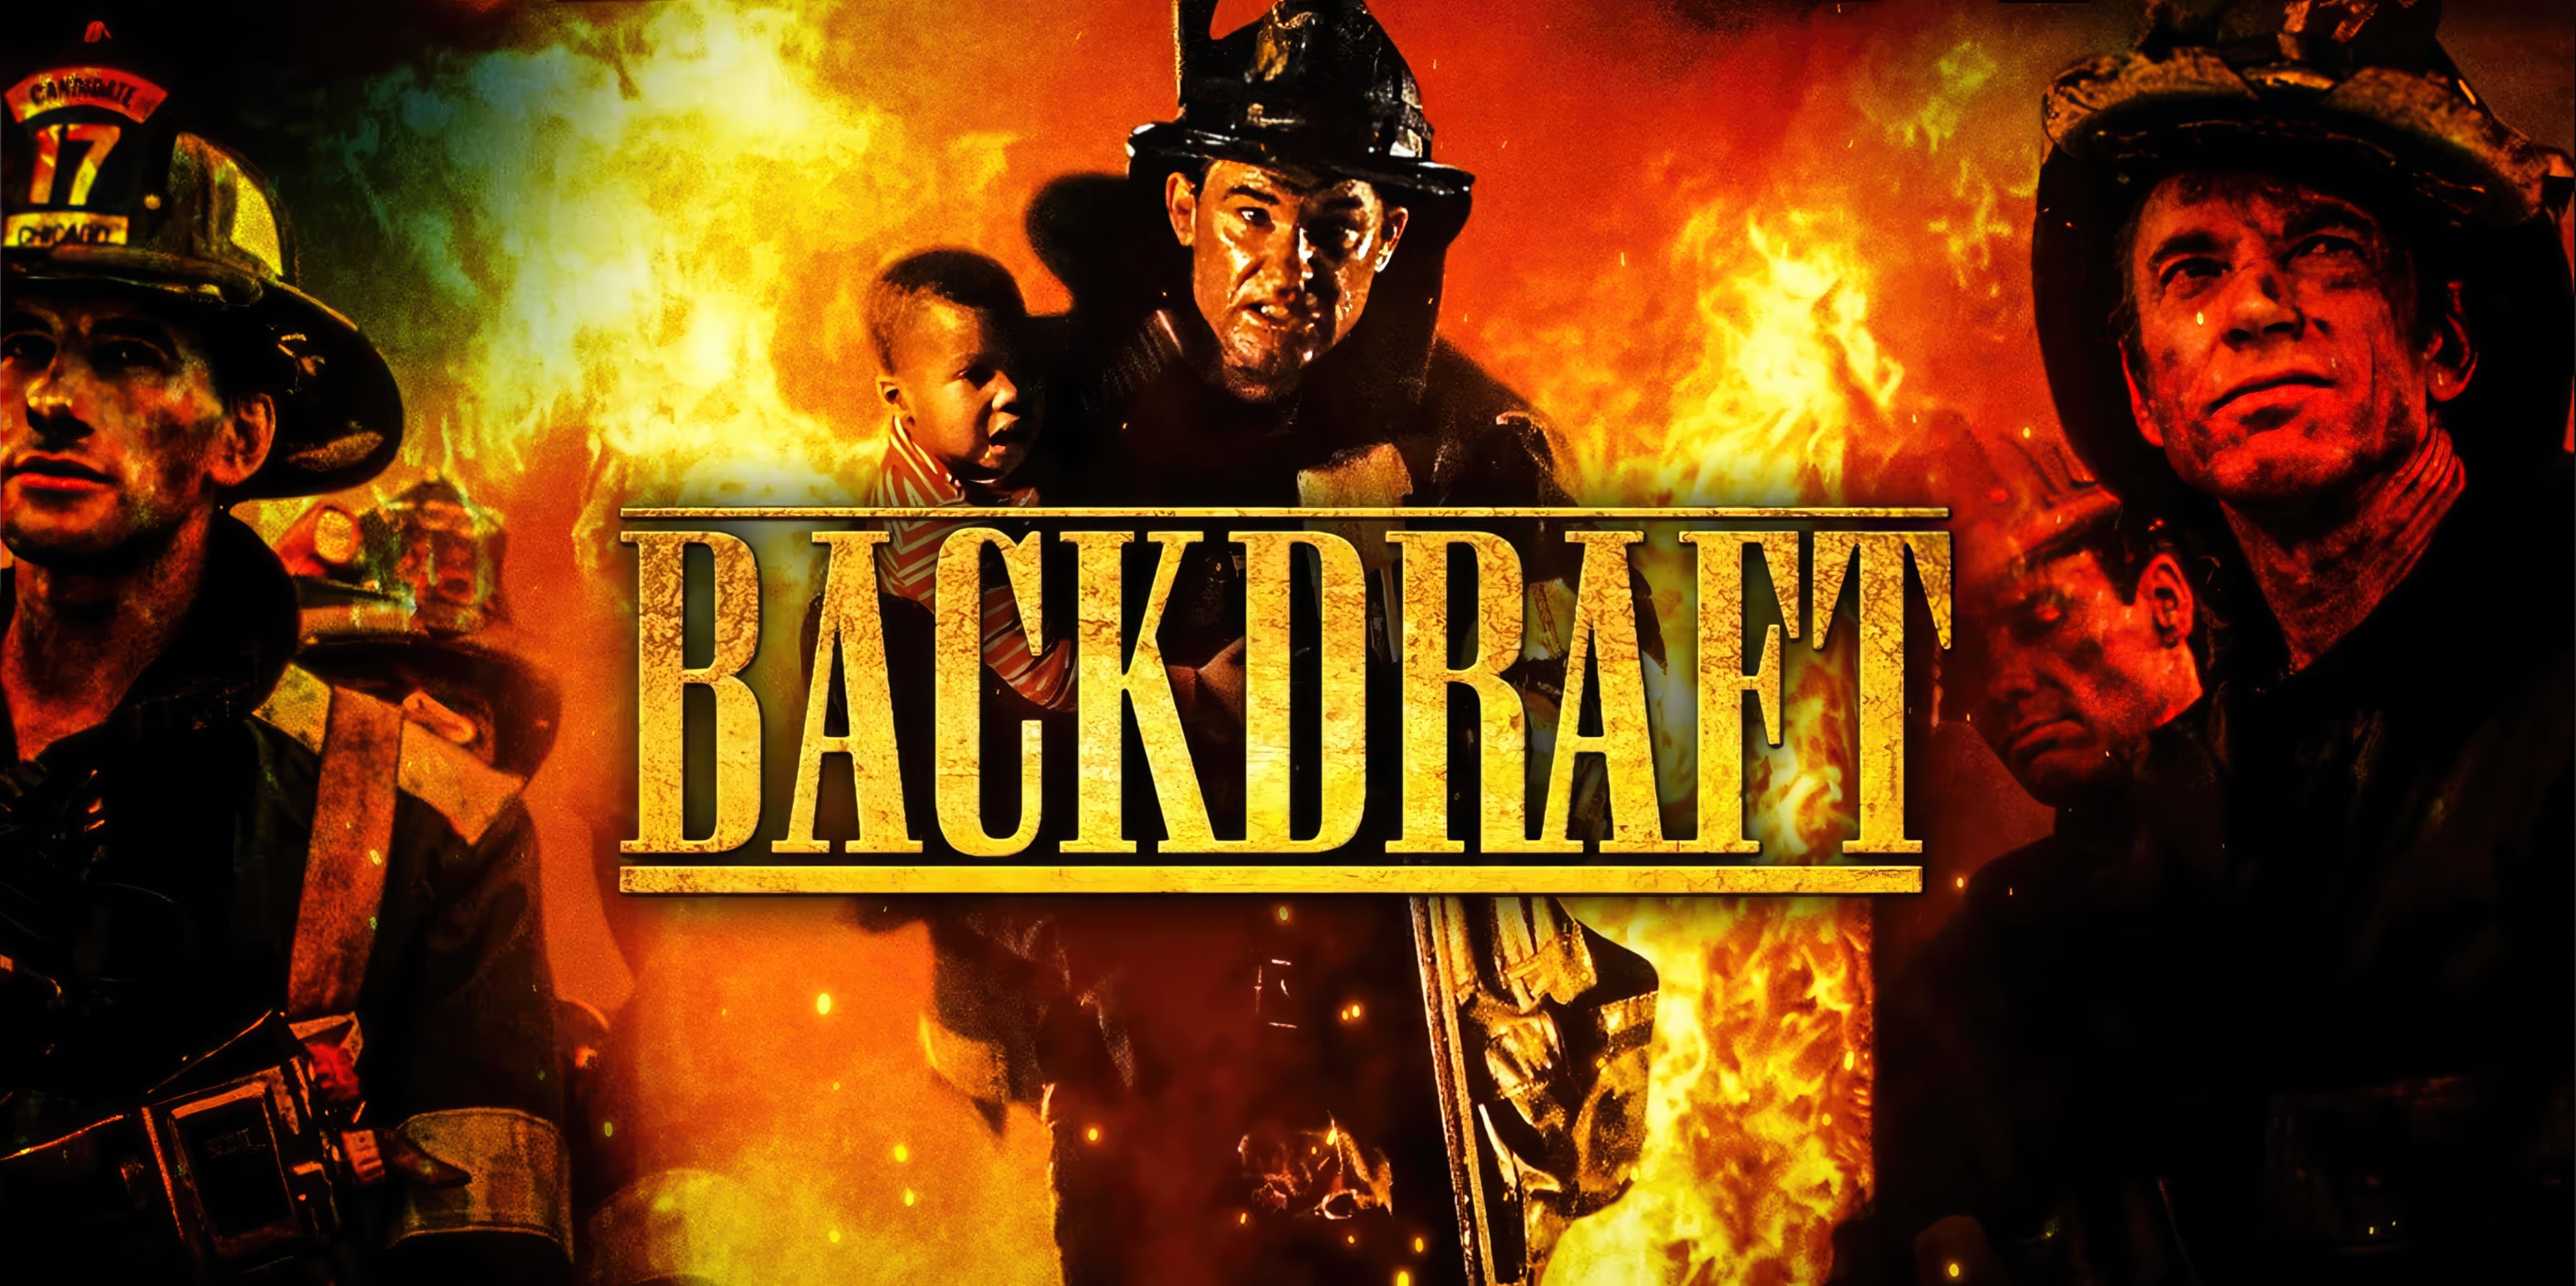 Backdraft Story Structure Breakdown - Image of Movie Film Poster